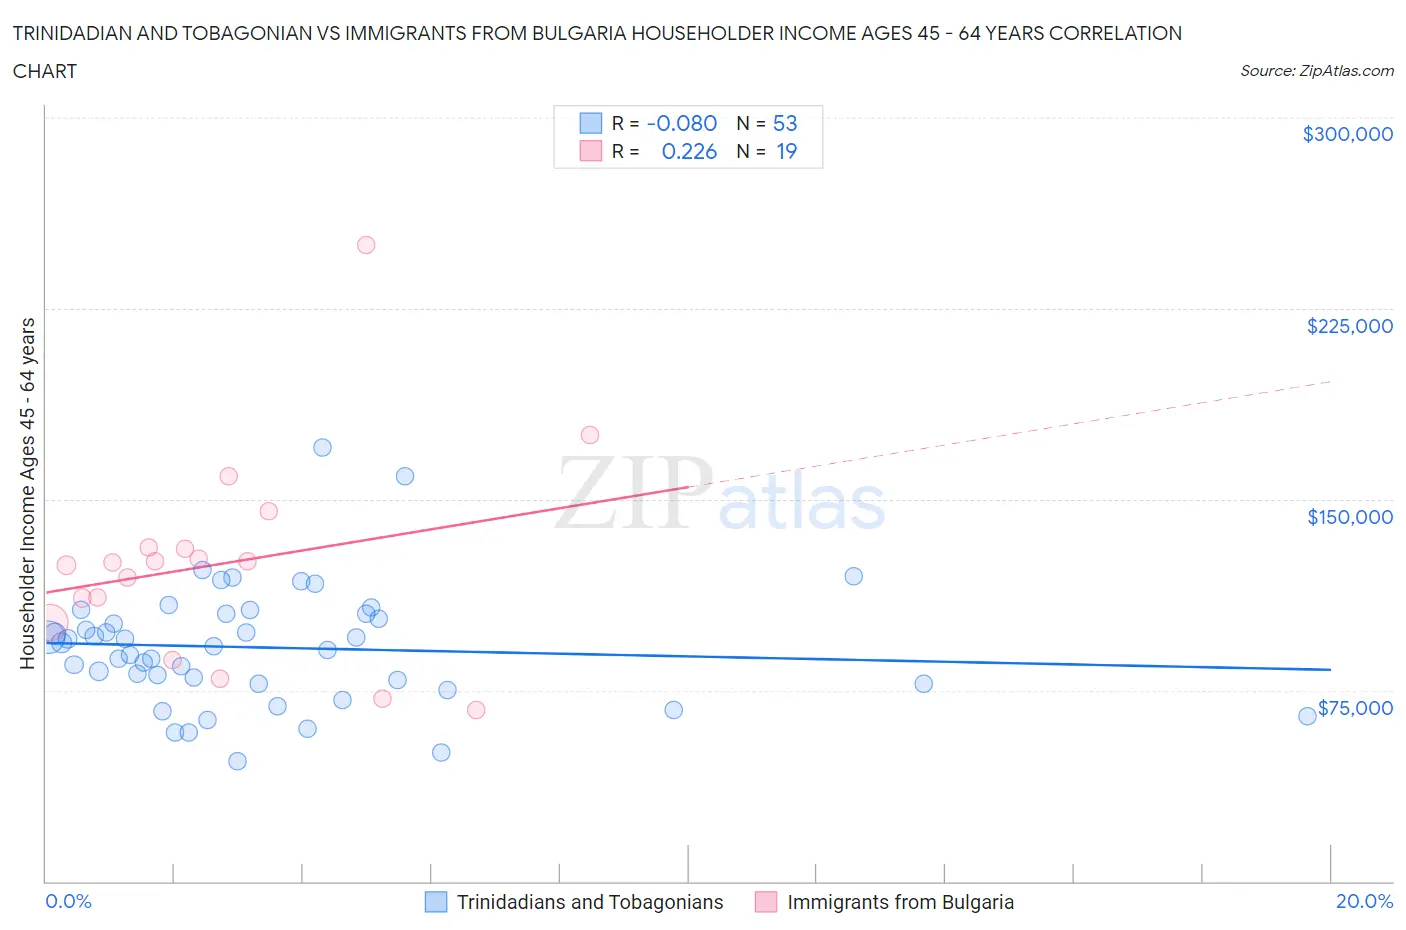 Trinidadian and Tobagonian vs Immigrants from Bulgaria Householder Income Ages 45 - 64 years